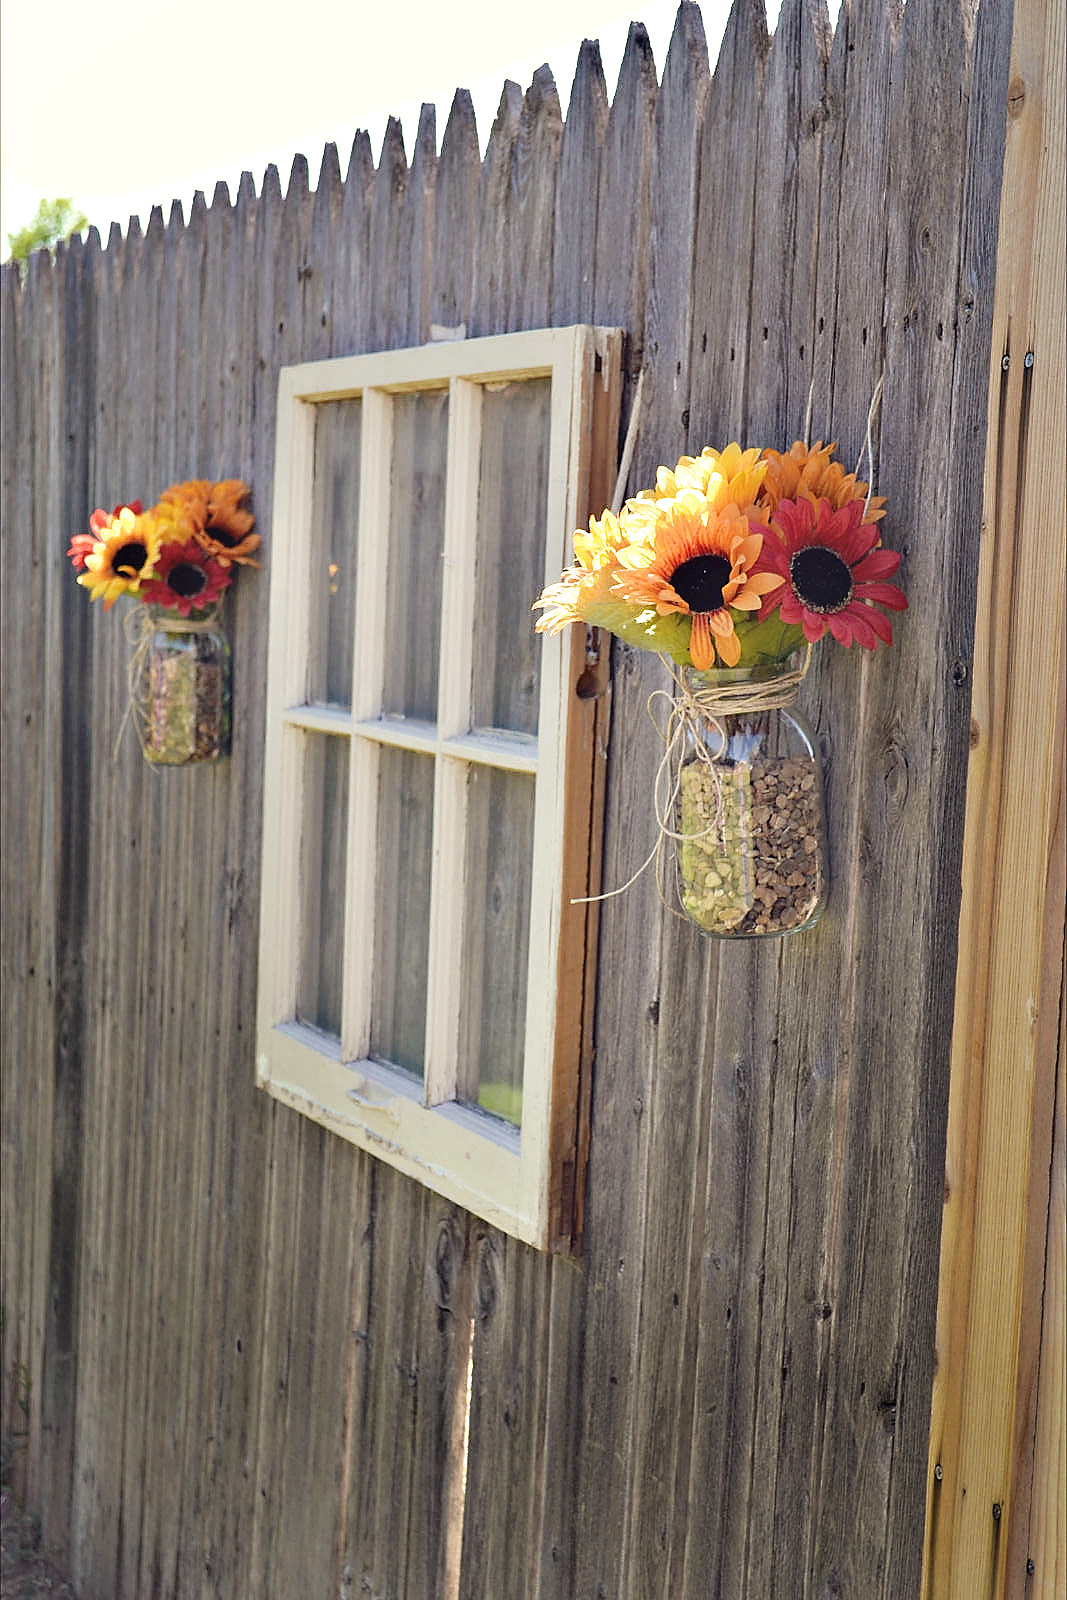 Using Old Window and Flower Decorate Wooden Fance